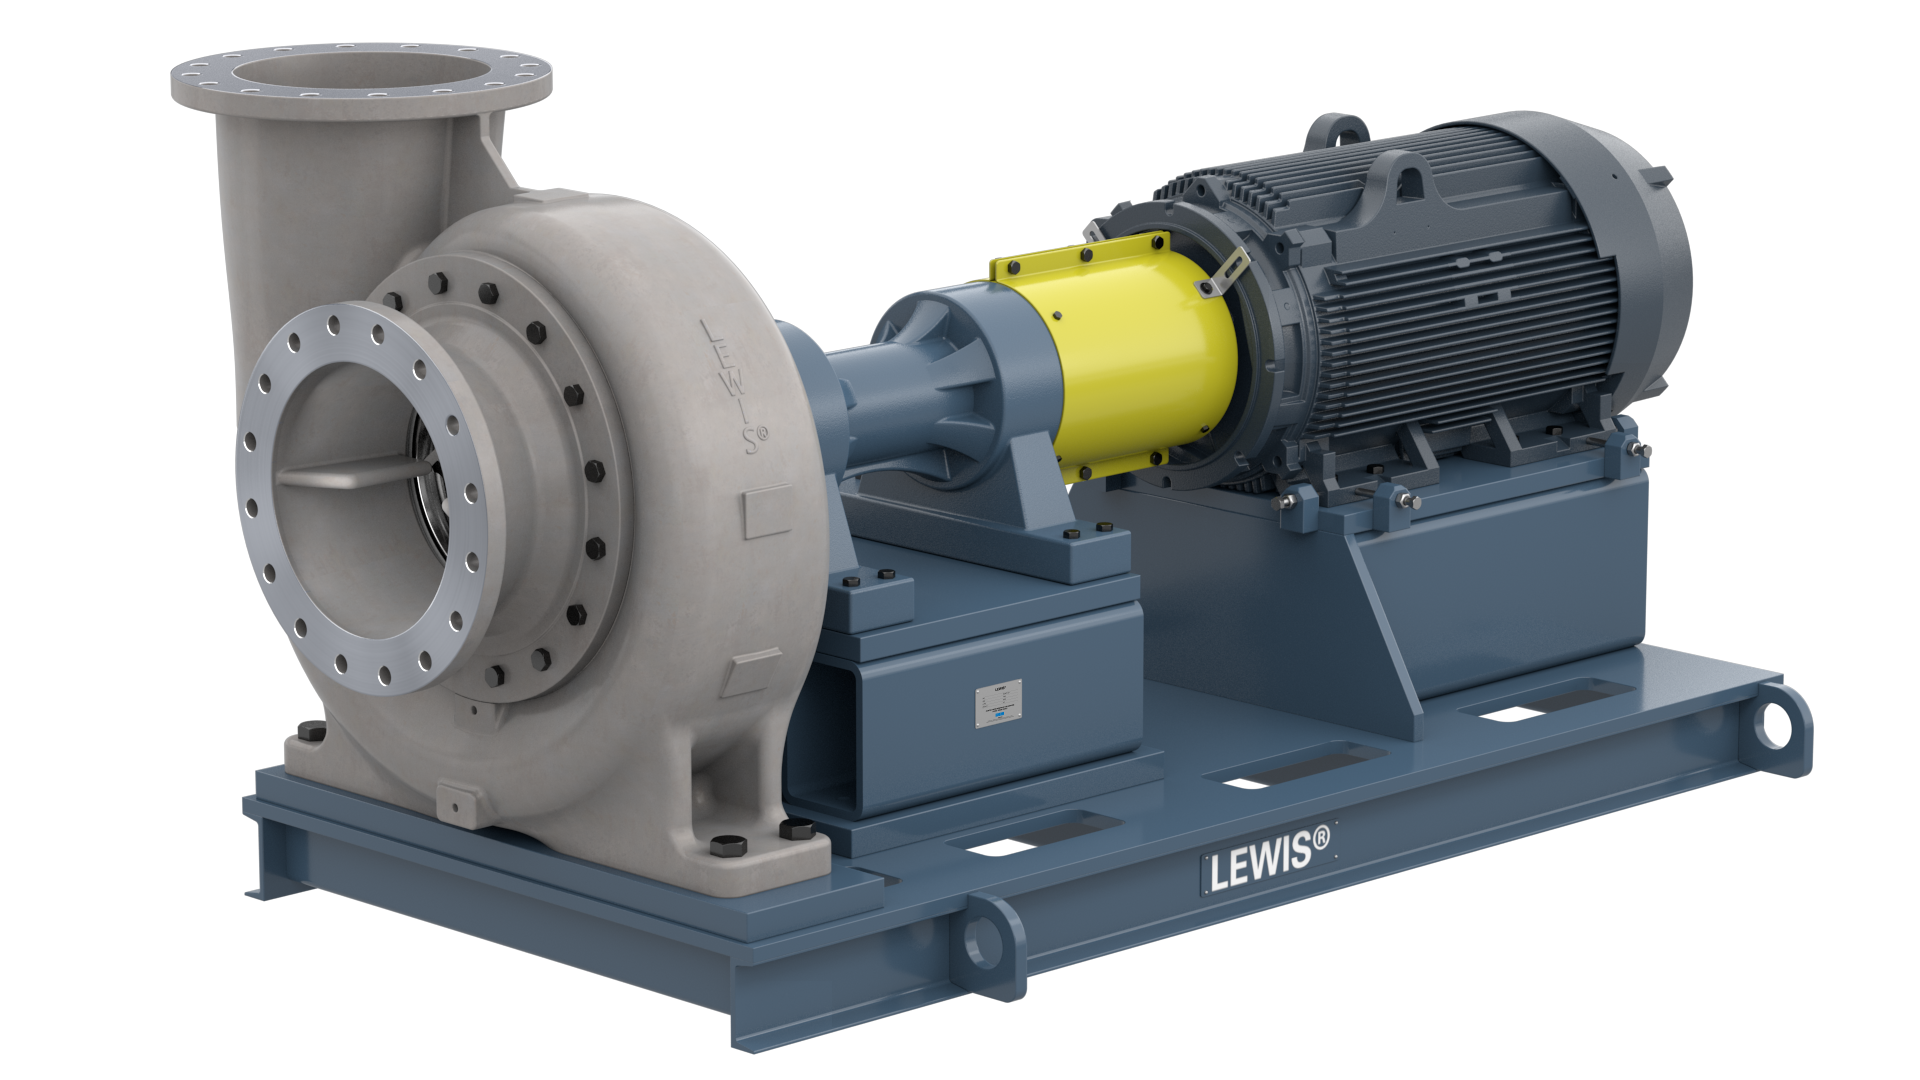 The new Lewis horizontal process pump is designed for chemical processing applications.